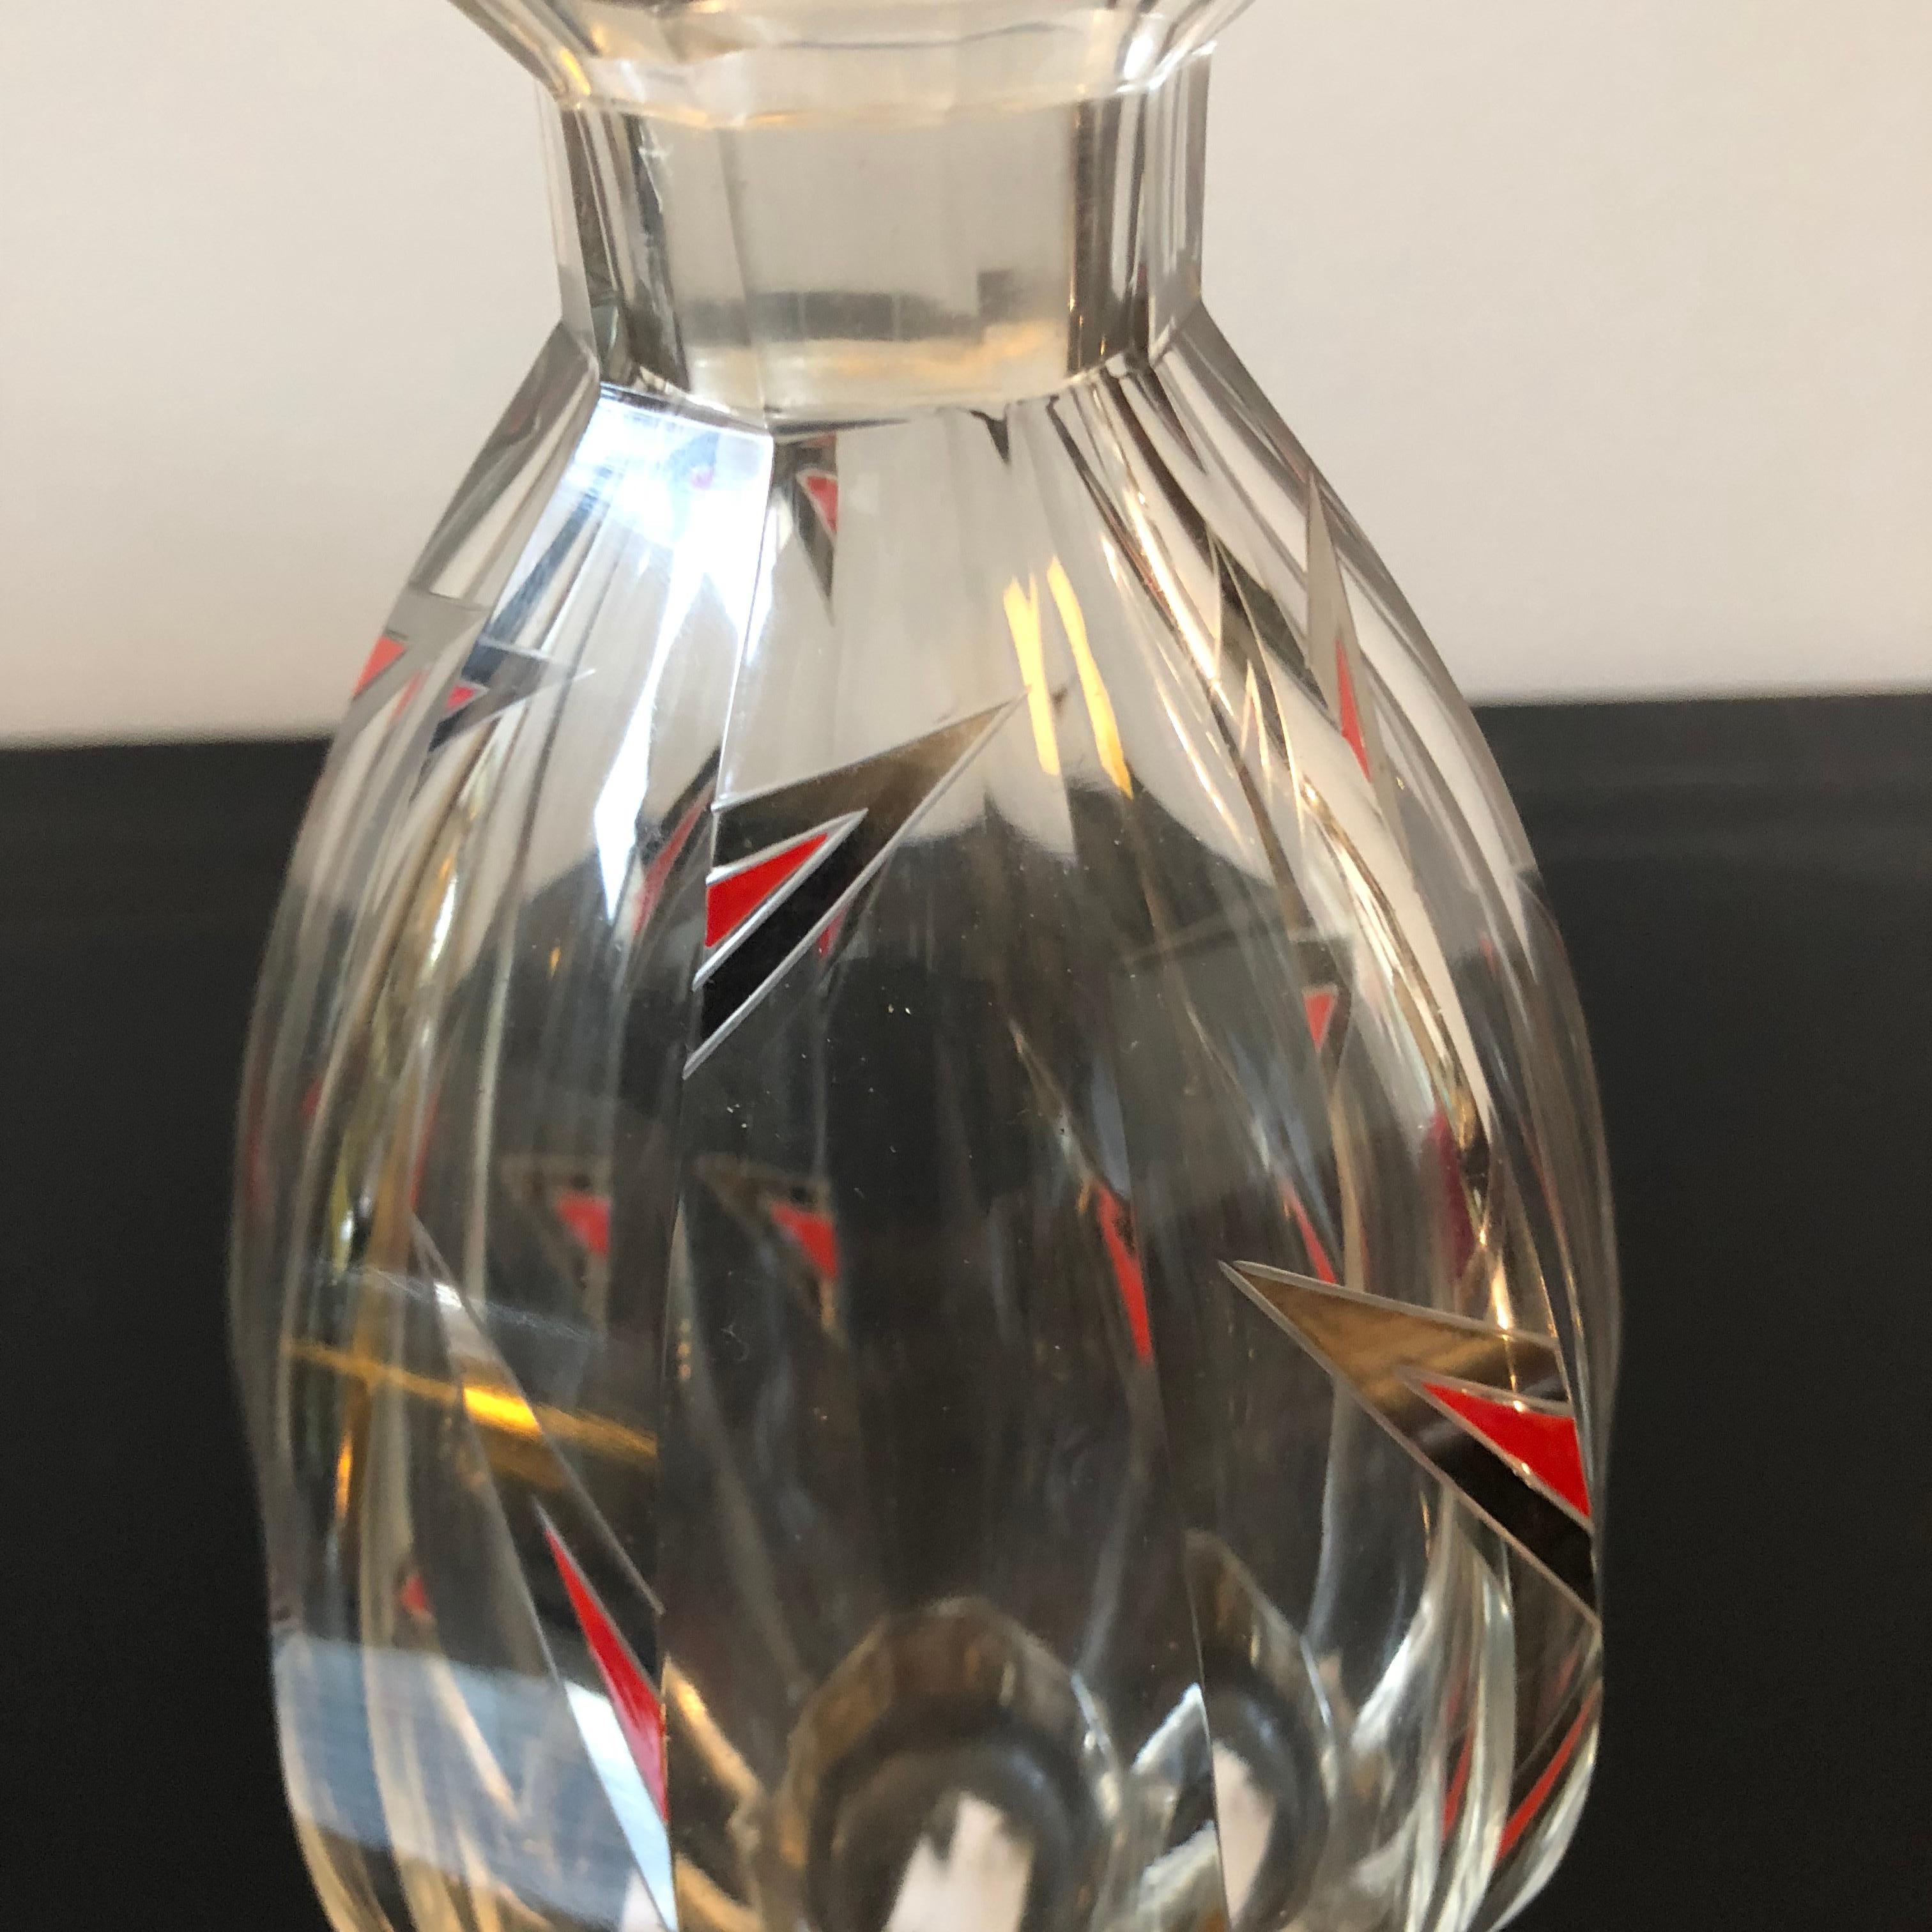 Particular liquor bottle, faceted crystal with colored geometric patterns. It's made in Italy in 1930.